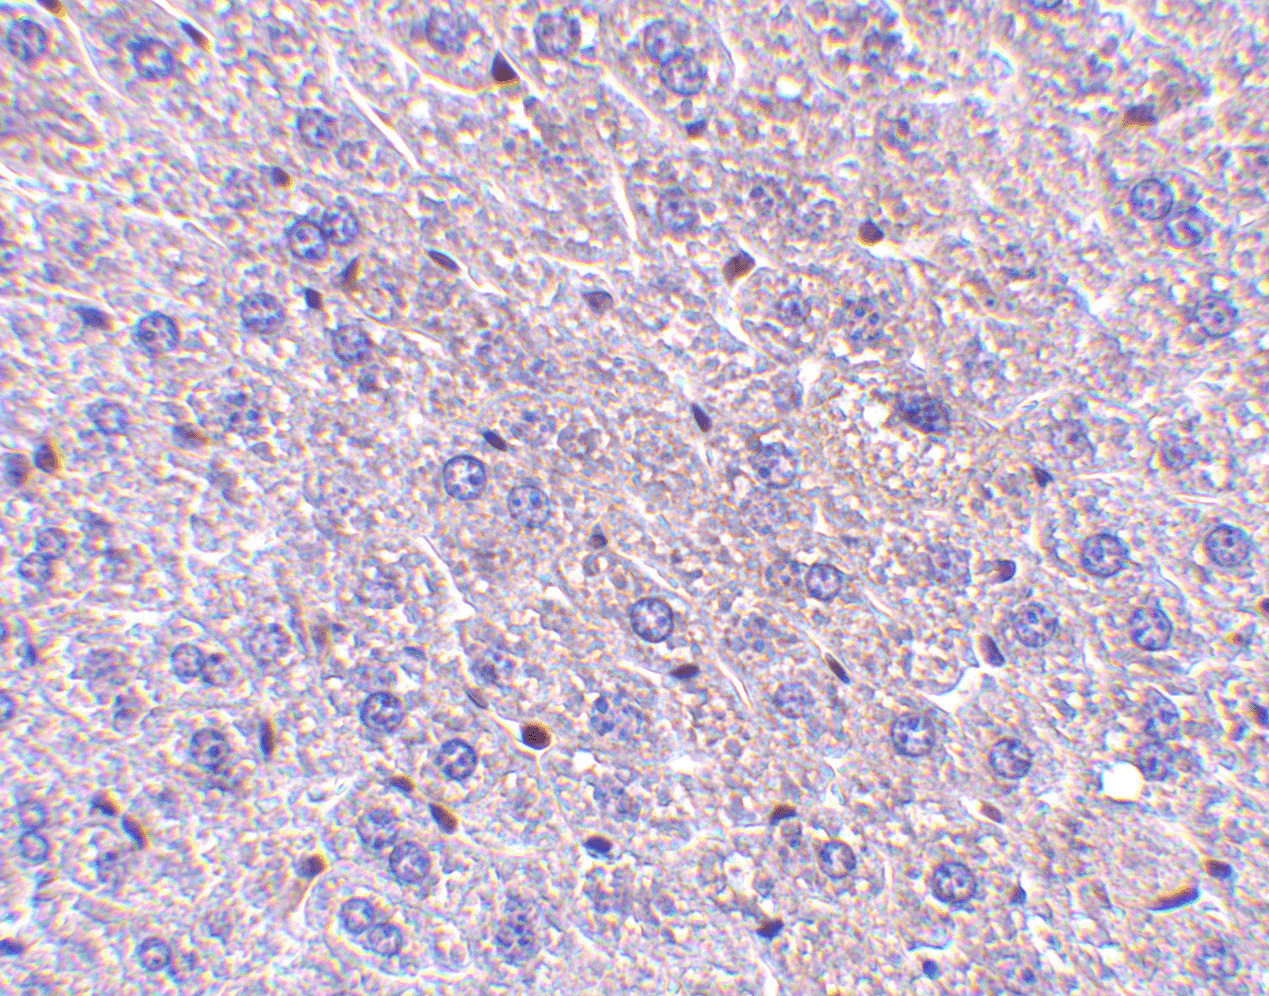 F1A alpha Antibody (OAPB00108) in Mouse Liver using Immunohistochemistry